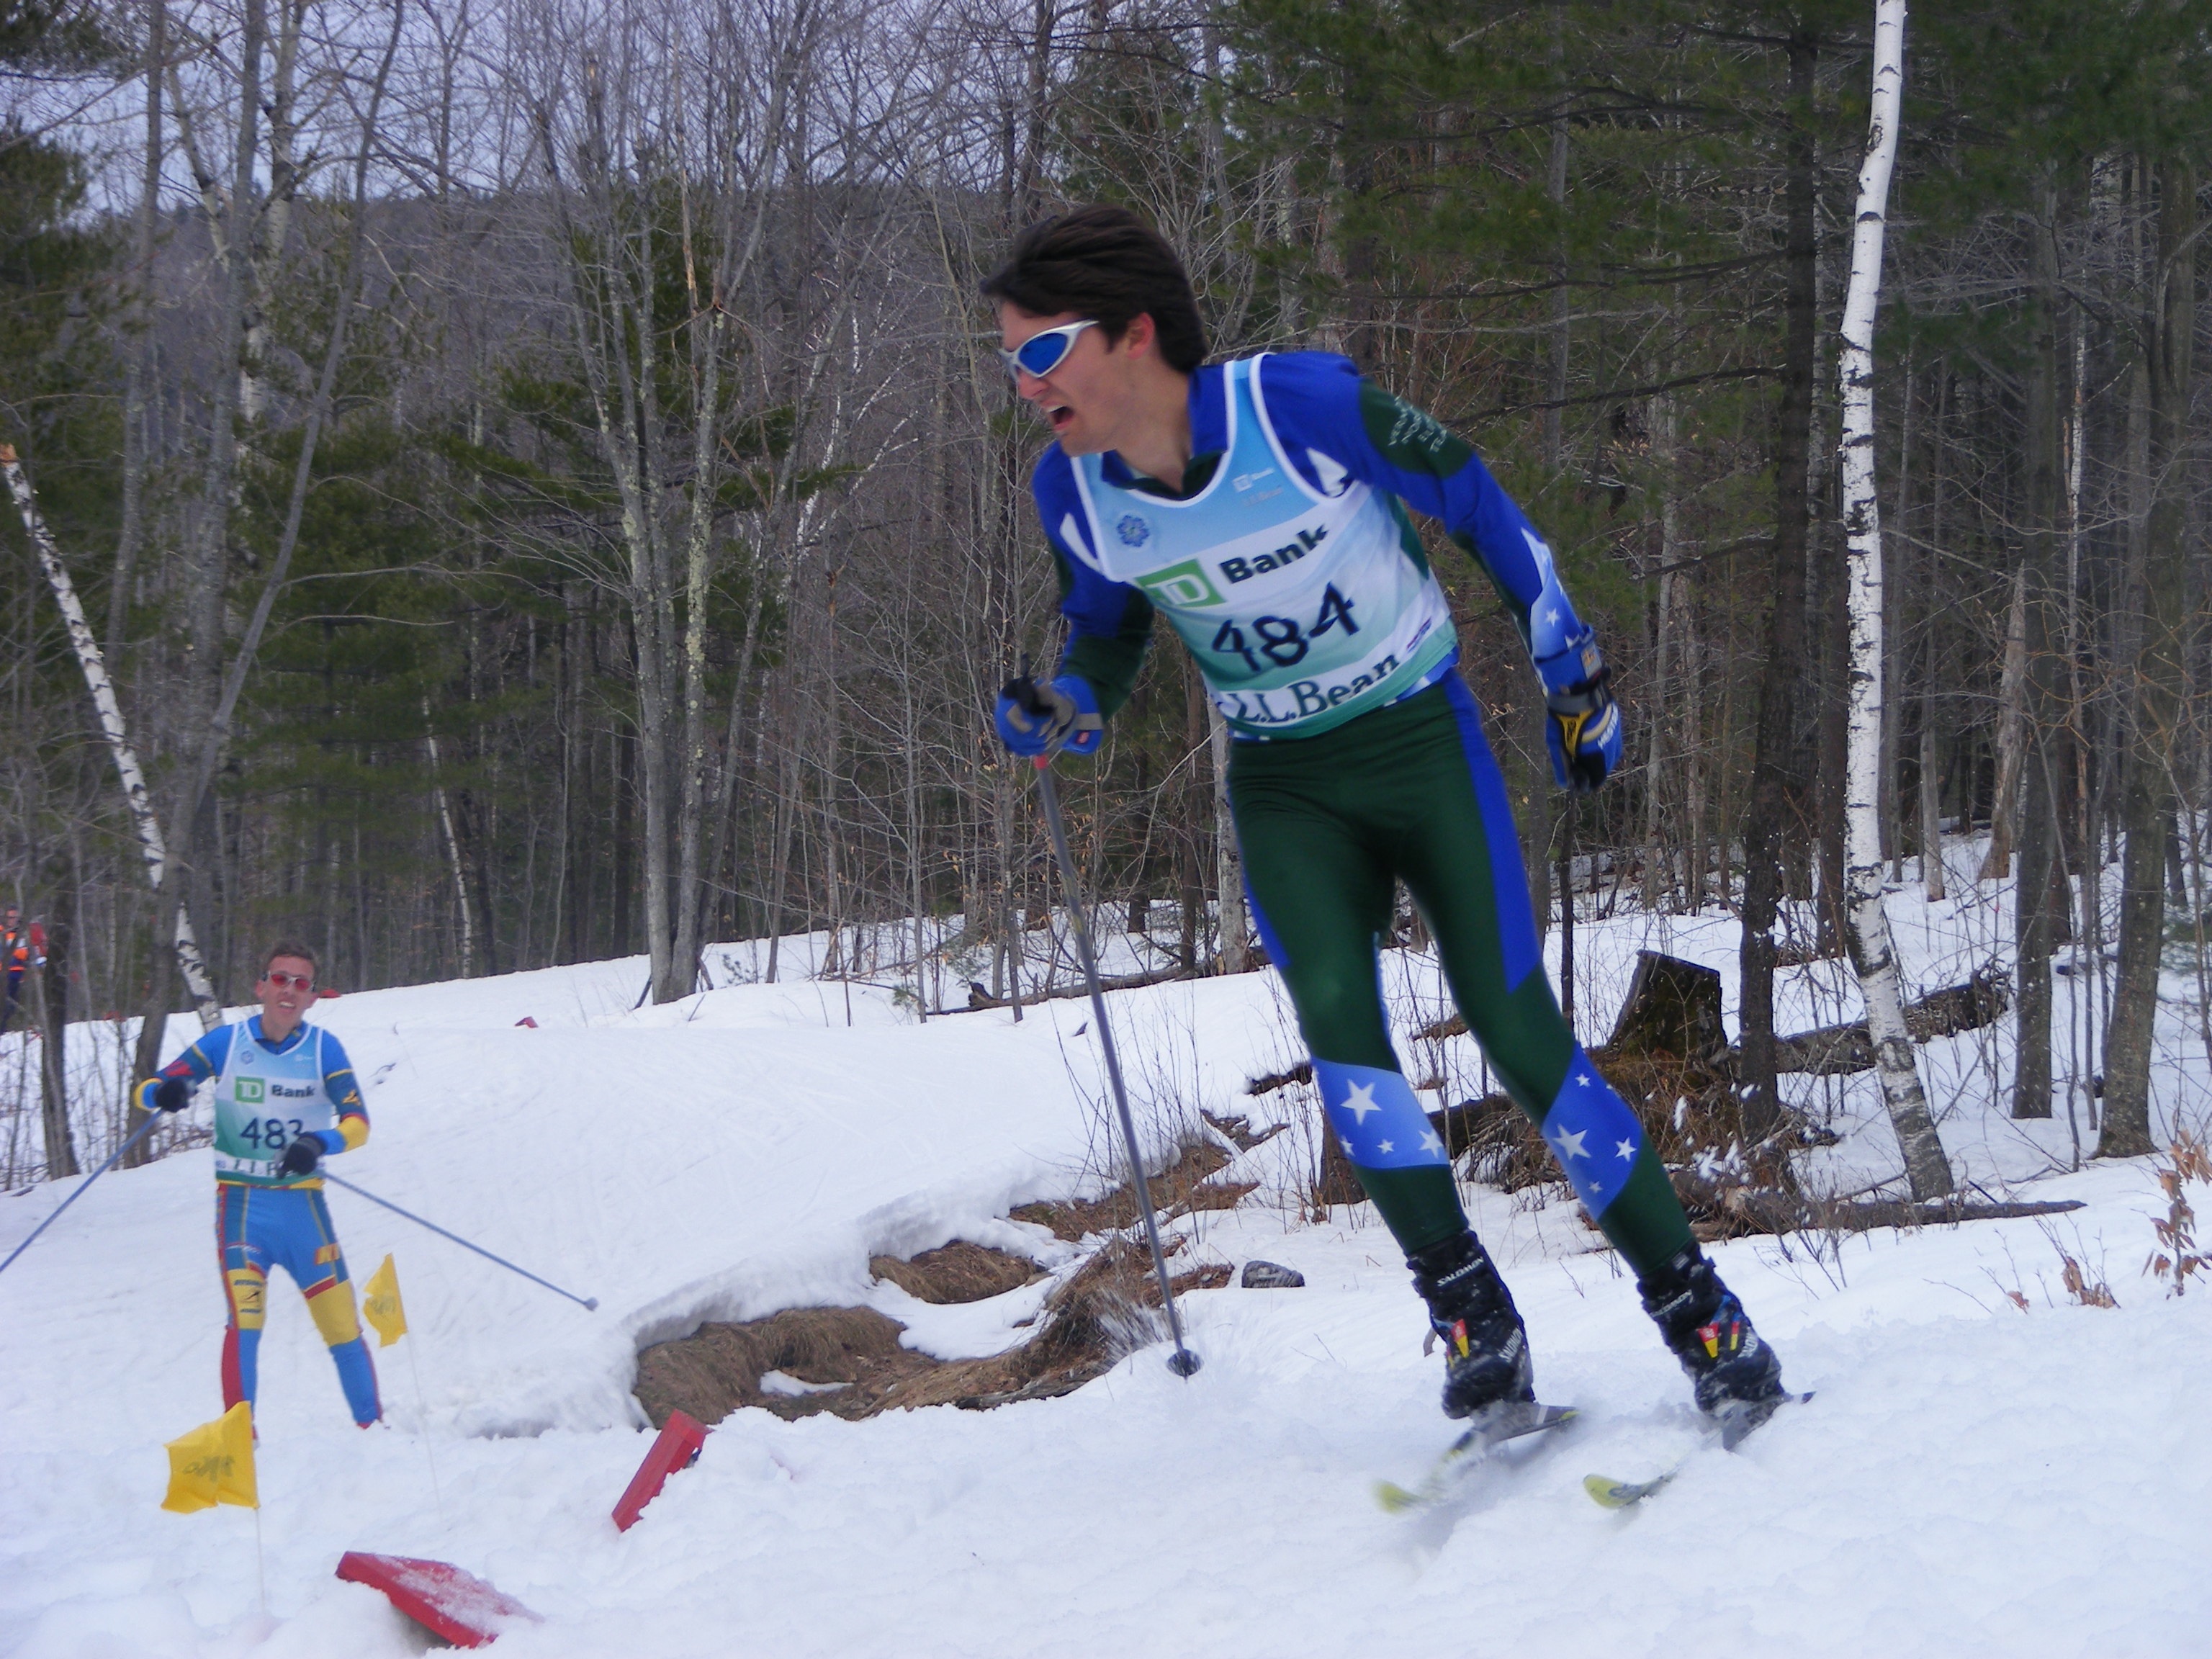 Vermont, Cirelli, Jahn Take Overall Titles at Eastern HS Champs